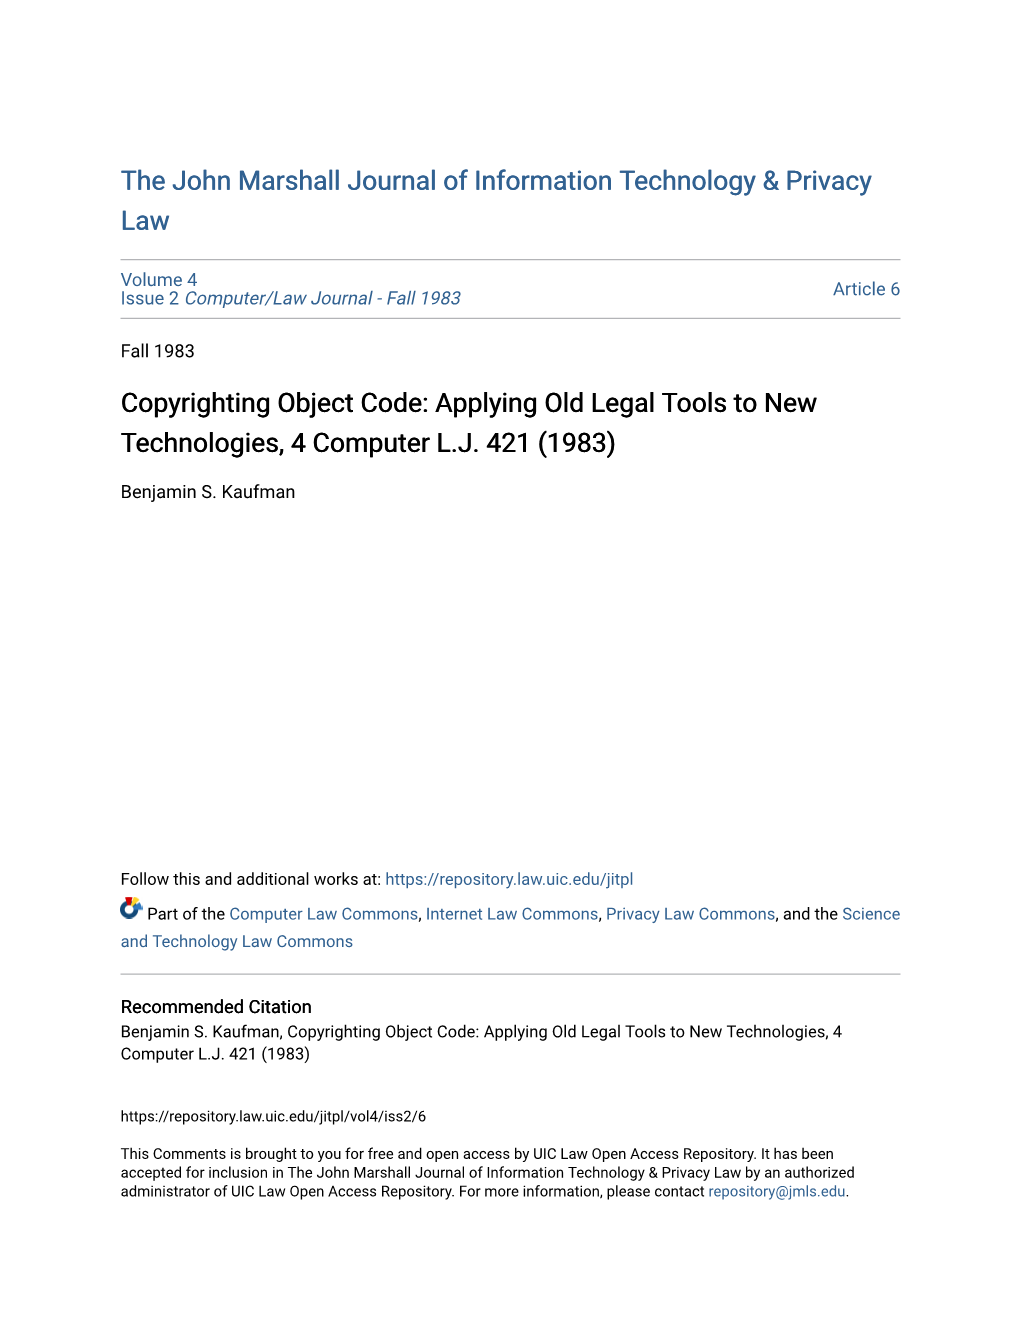 Copyrighting Object Code: Applying Old Legal Tools to New Technologies, 4 Computer L.J